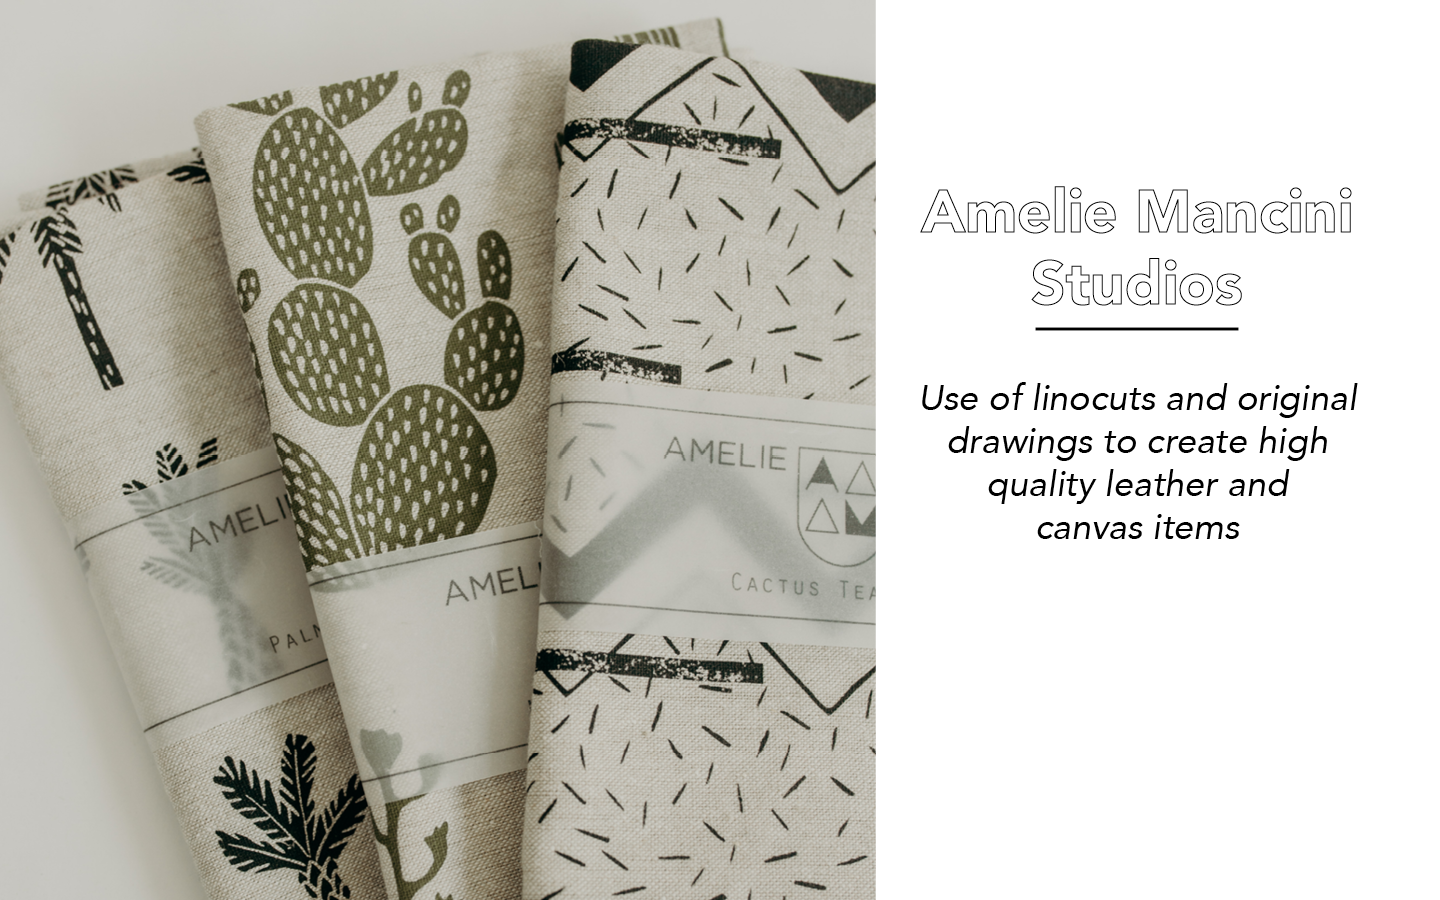 Canvas items with cactus patterns on them from Amelie Mancini Studios